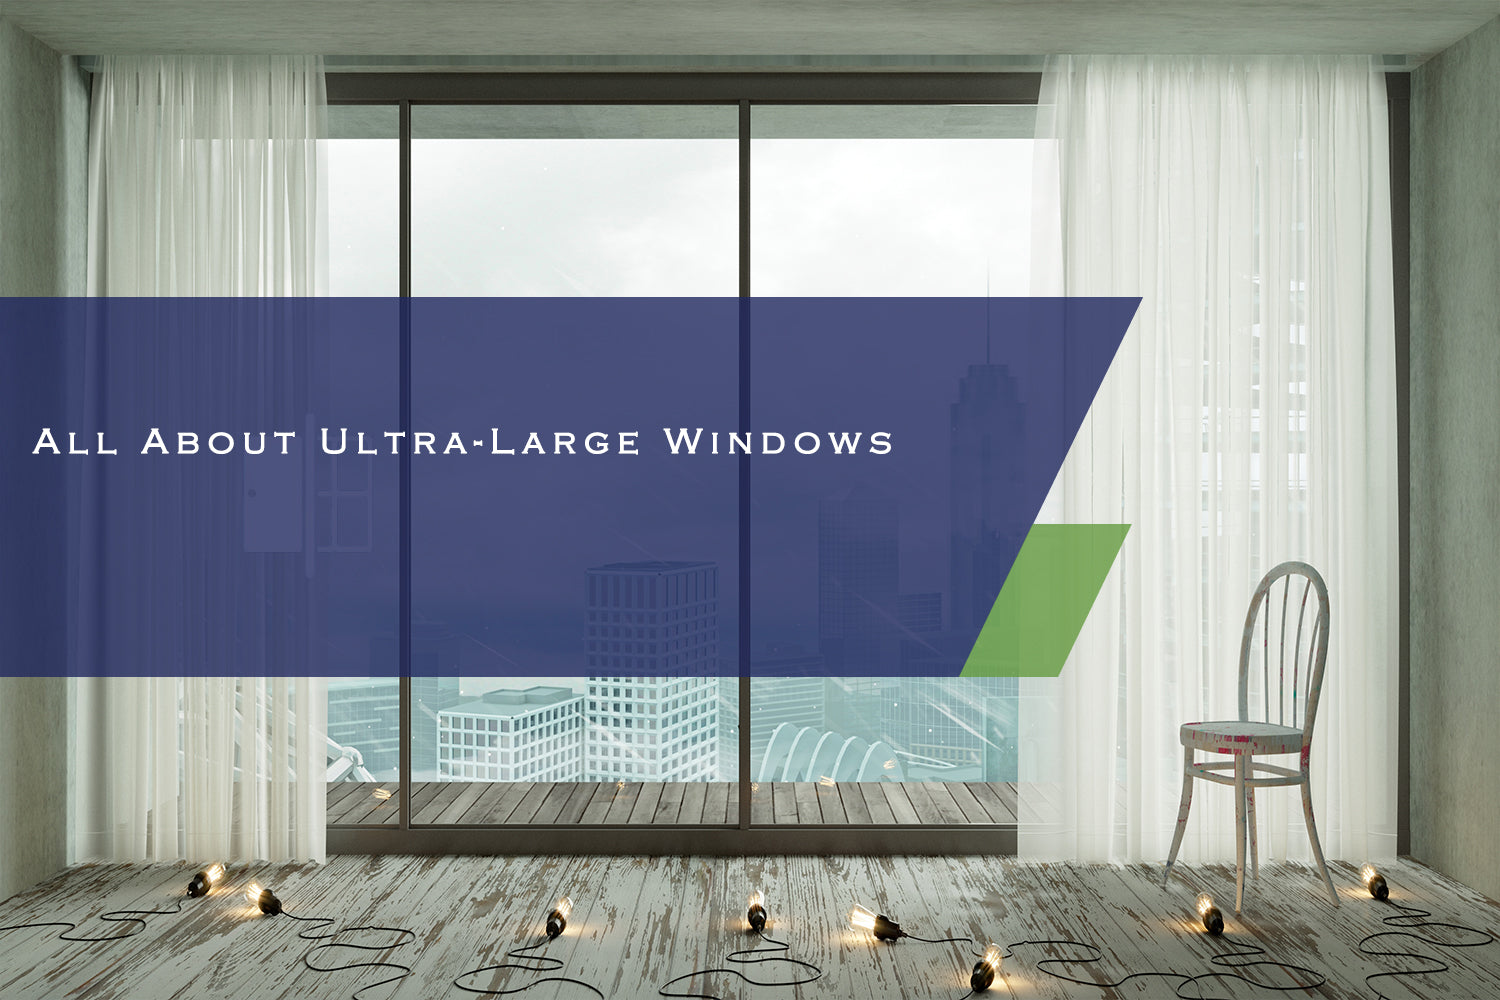 All About Ultra-Large Windows